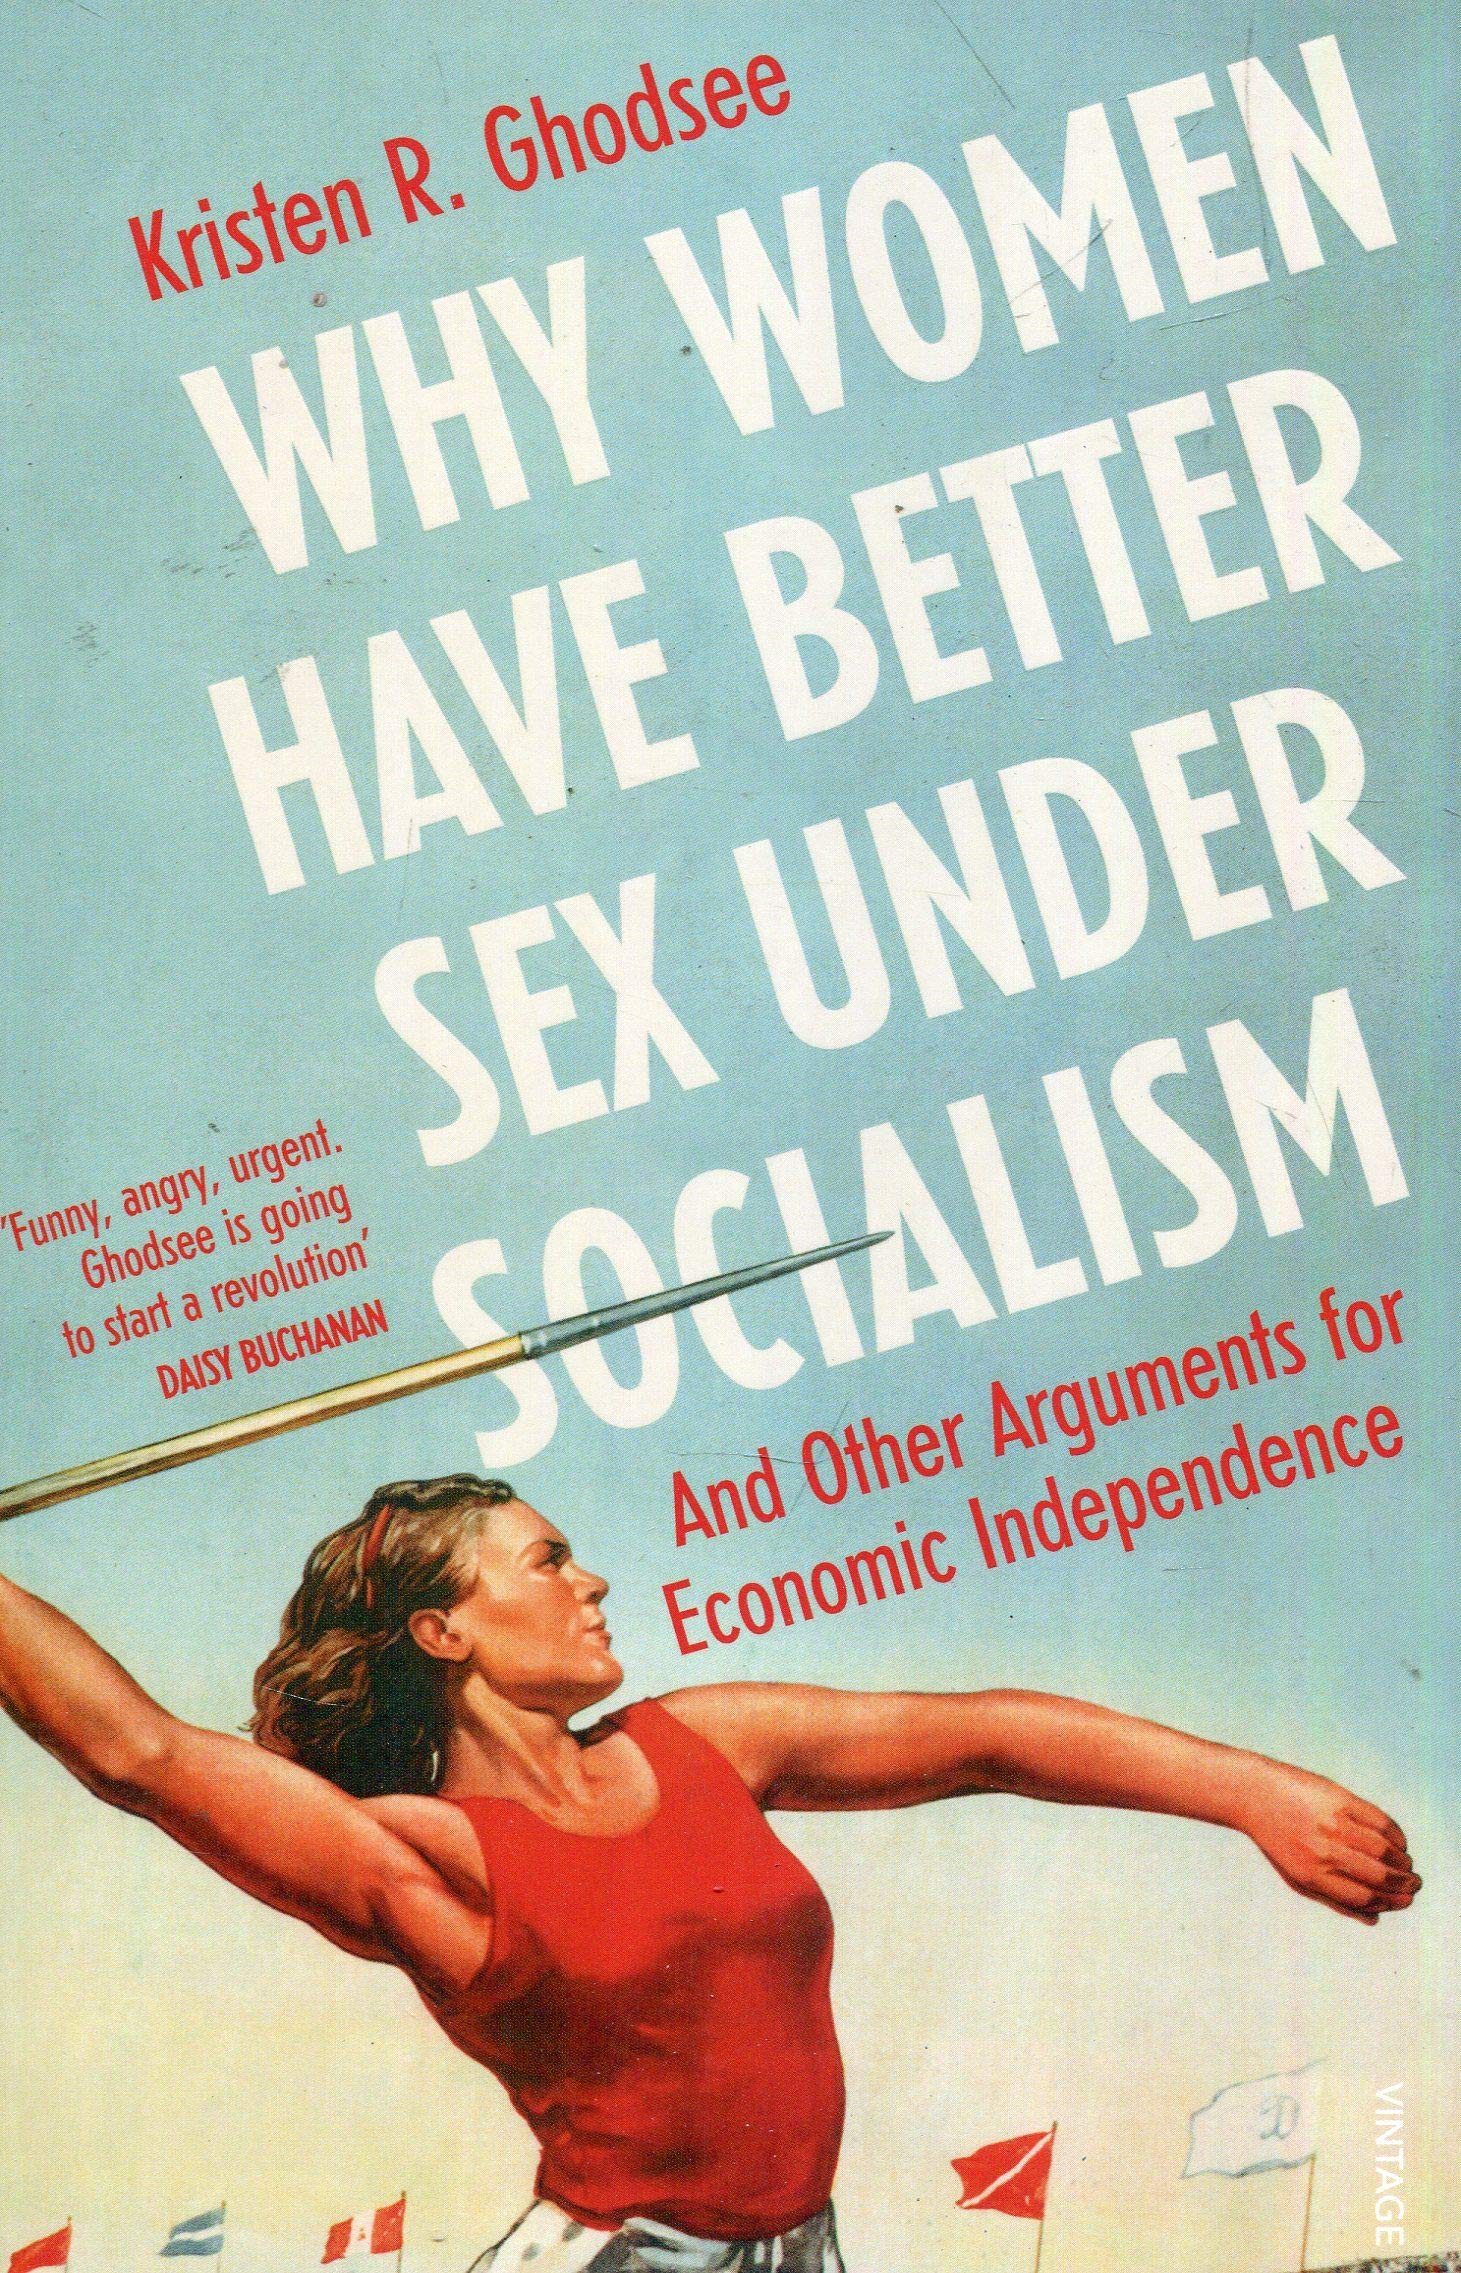 Why Women Have Better Sex Under Socialism | Kristen Ghodsee